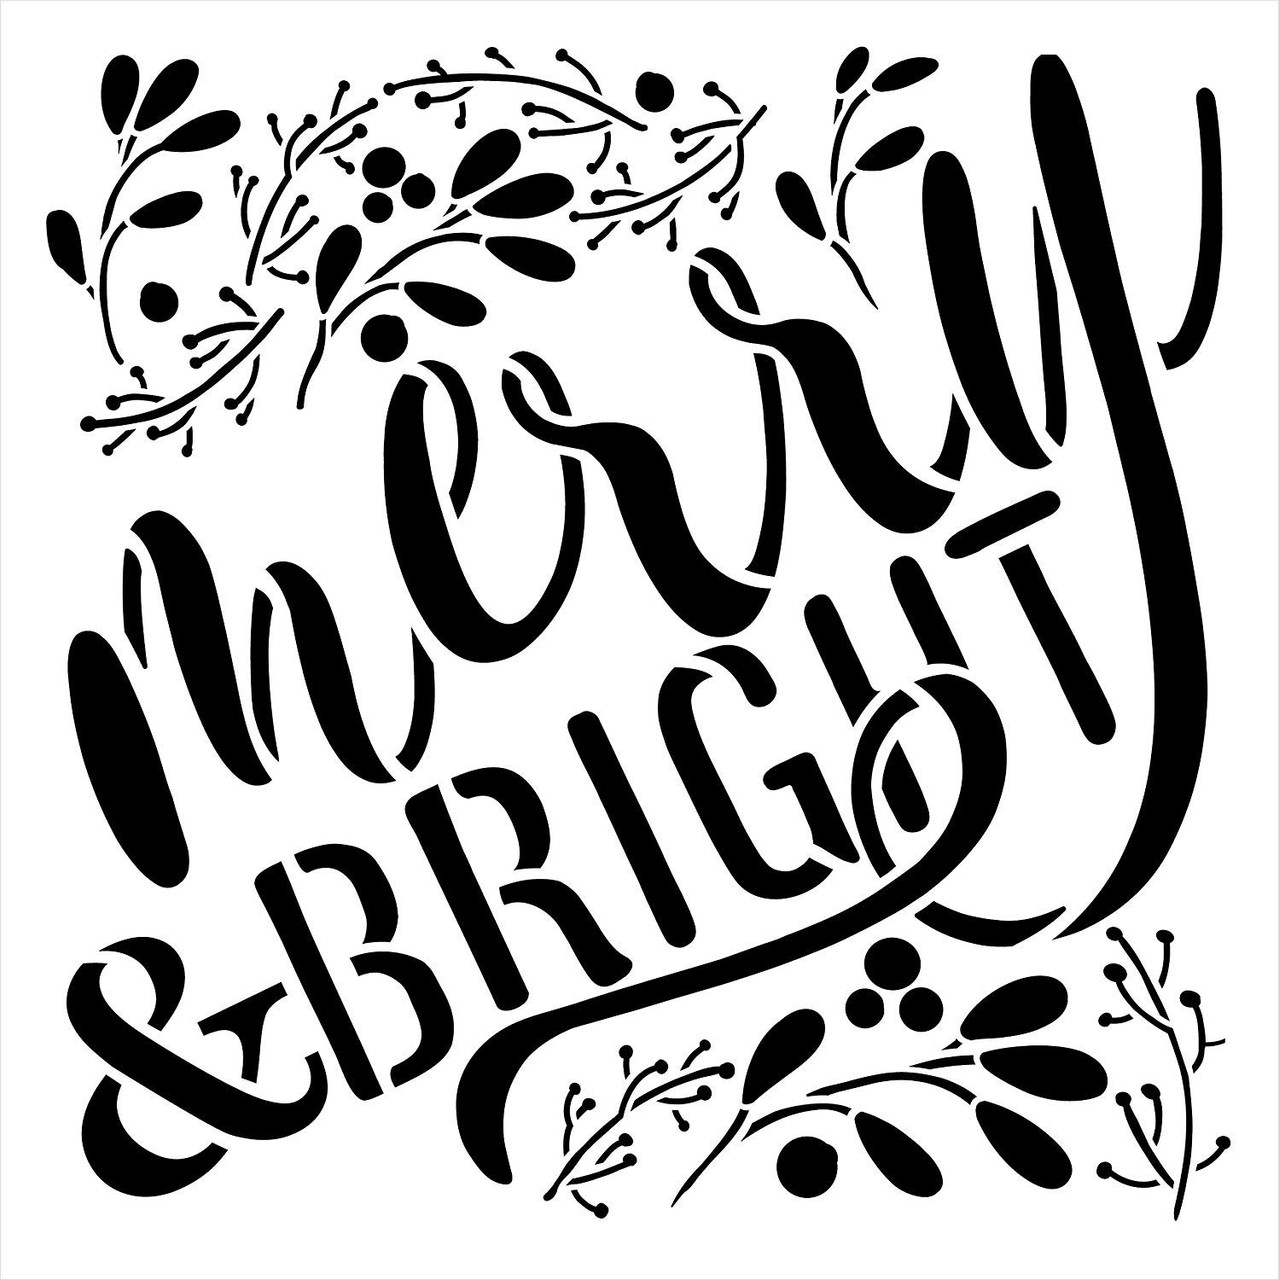 Merry & Bright Stencil by StudioR12 - Mistletoe | Reusable Mylar Template Paint Square Wood Sign | Craft Country Christmas Holiday Home Decor | Rustic DIY Ampersand Farmhouse | SELECT SIZE